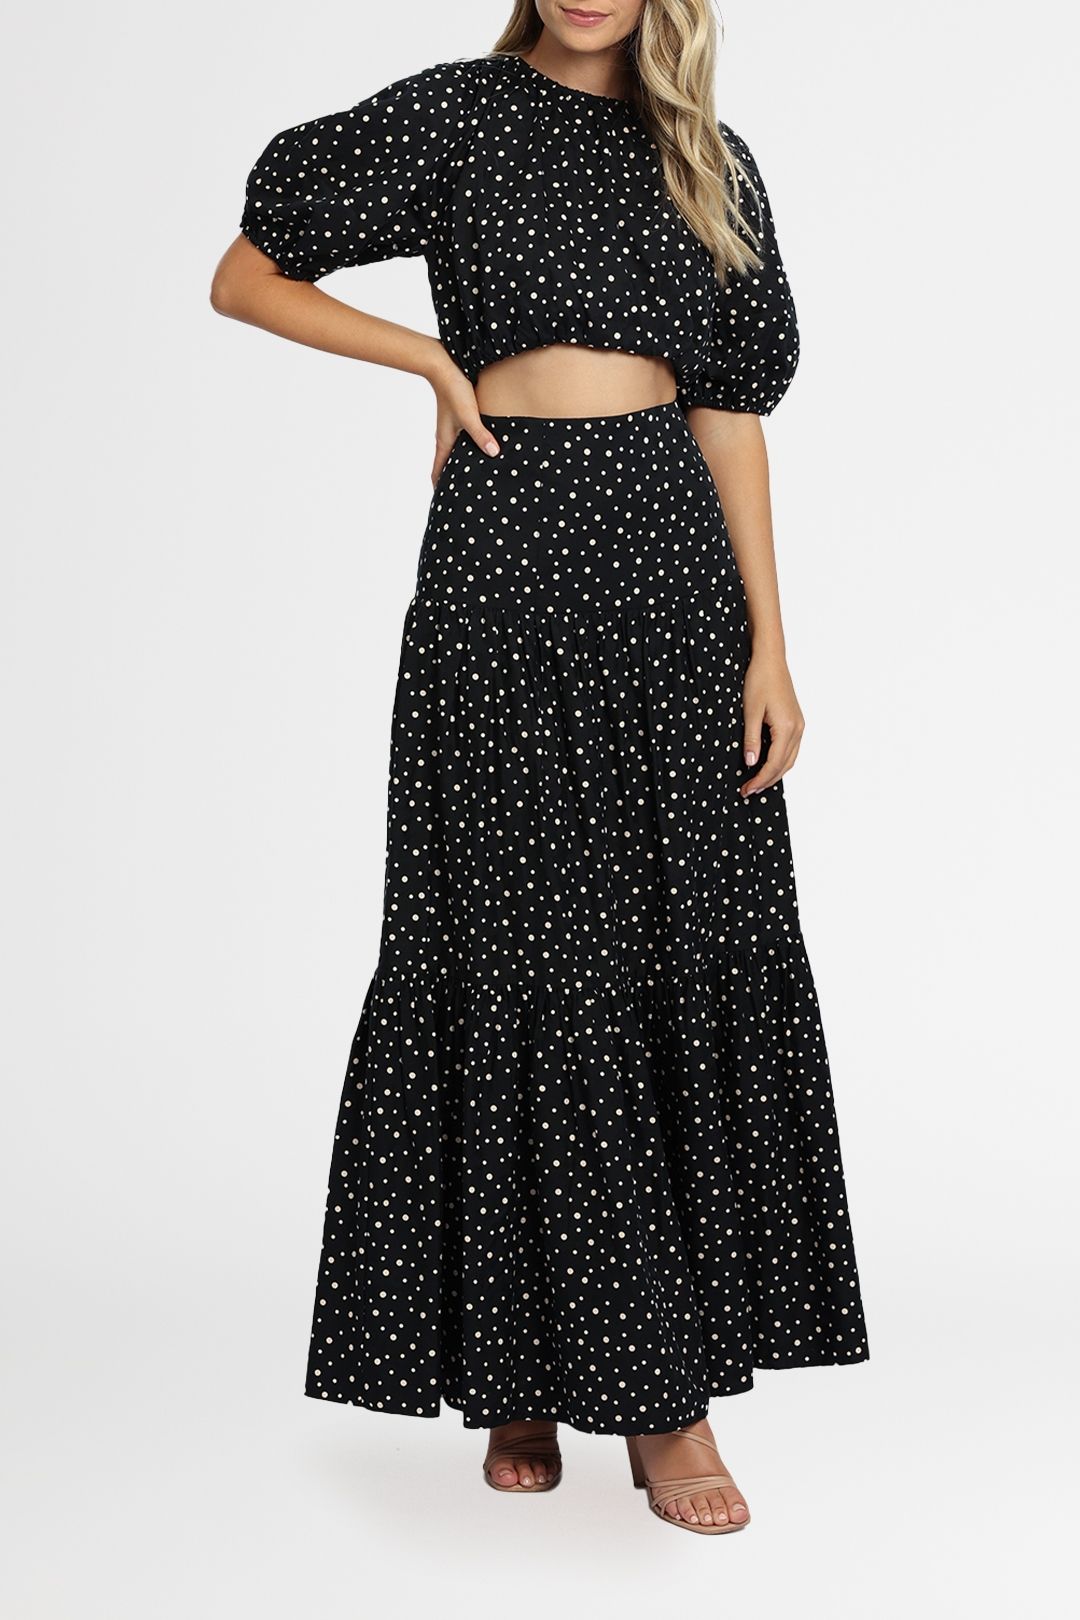 Significant Other Poppy Top and Skirt Set Black Cream Polka cropped maxi